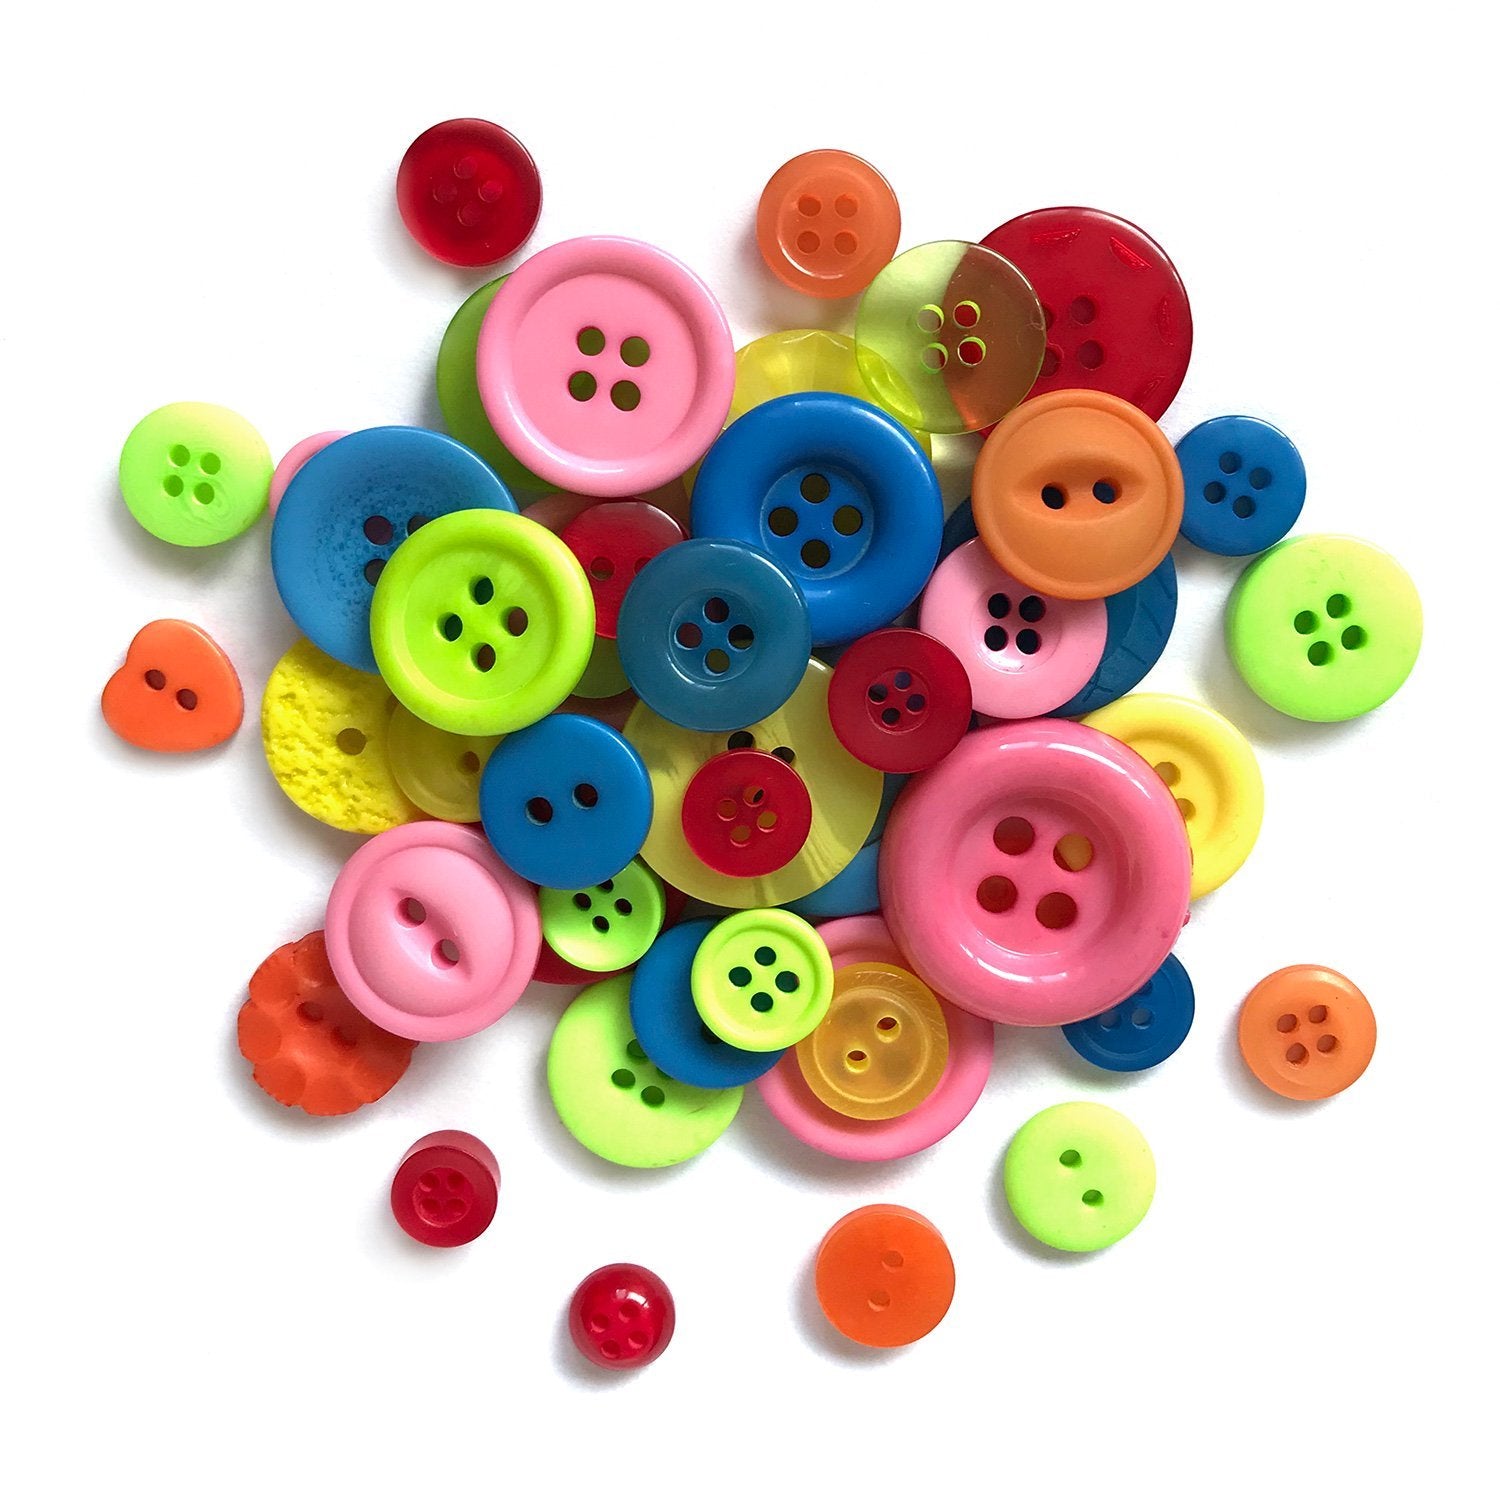 Button Basics, Colorful Sewing Buttons & More